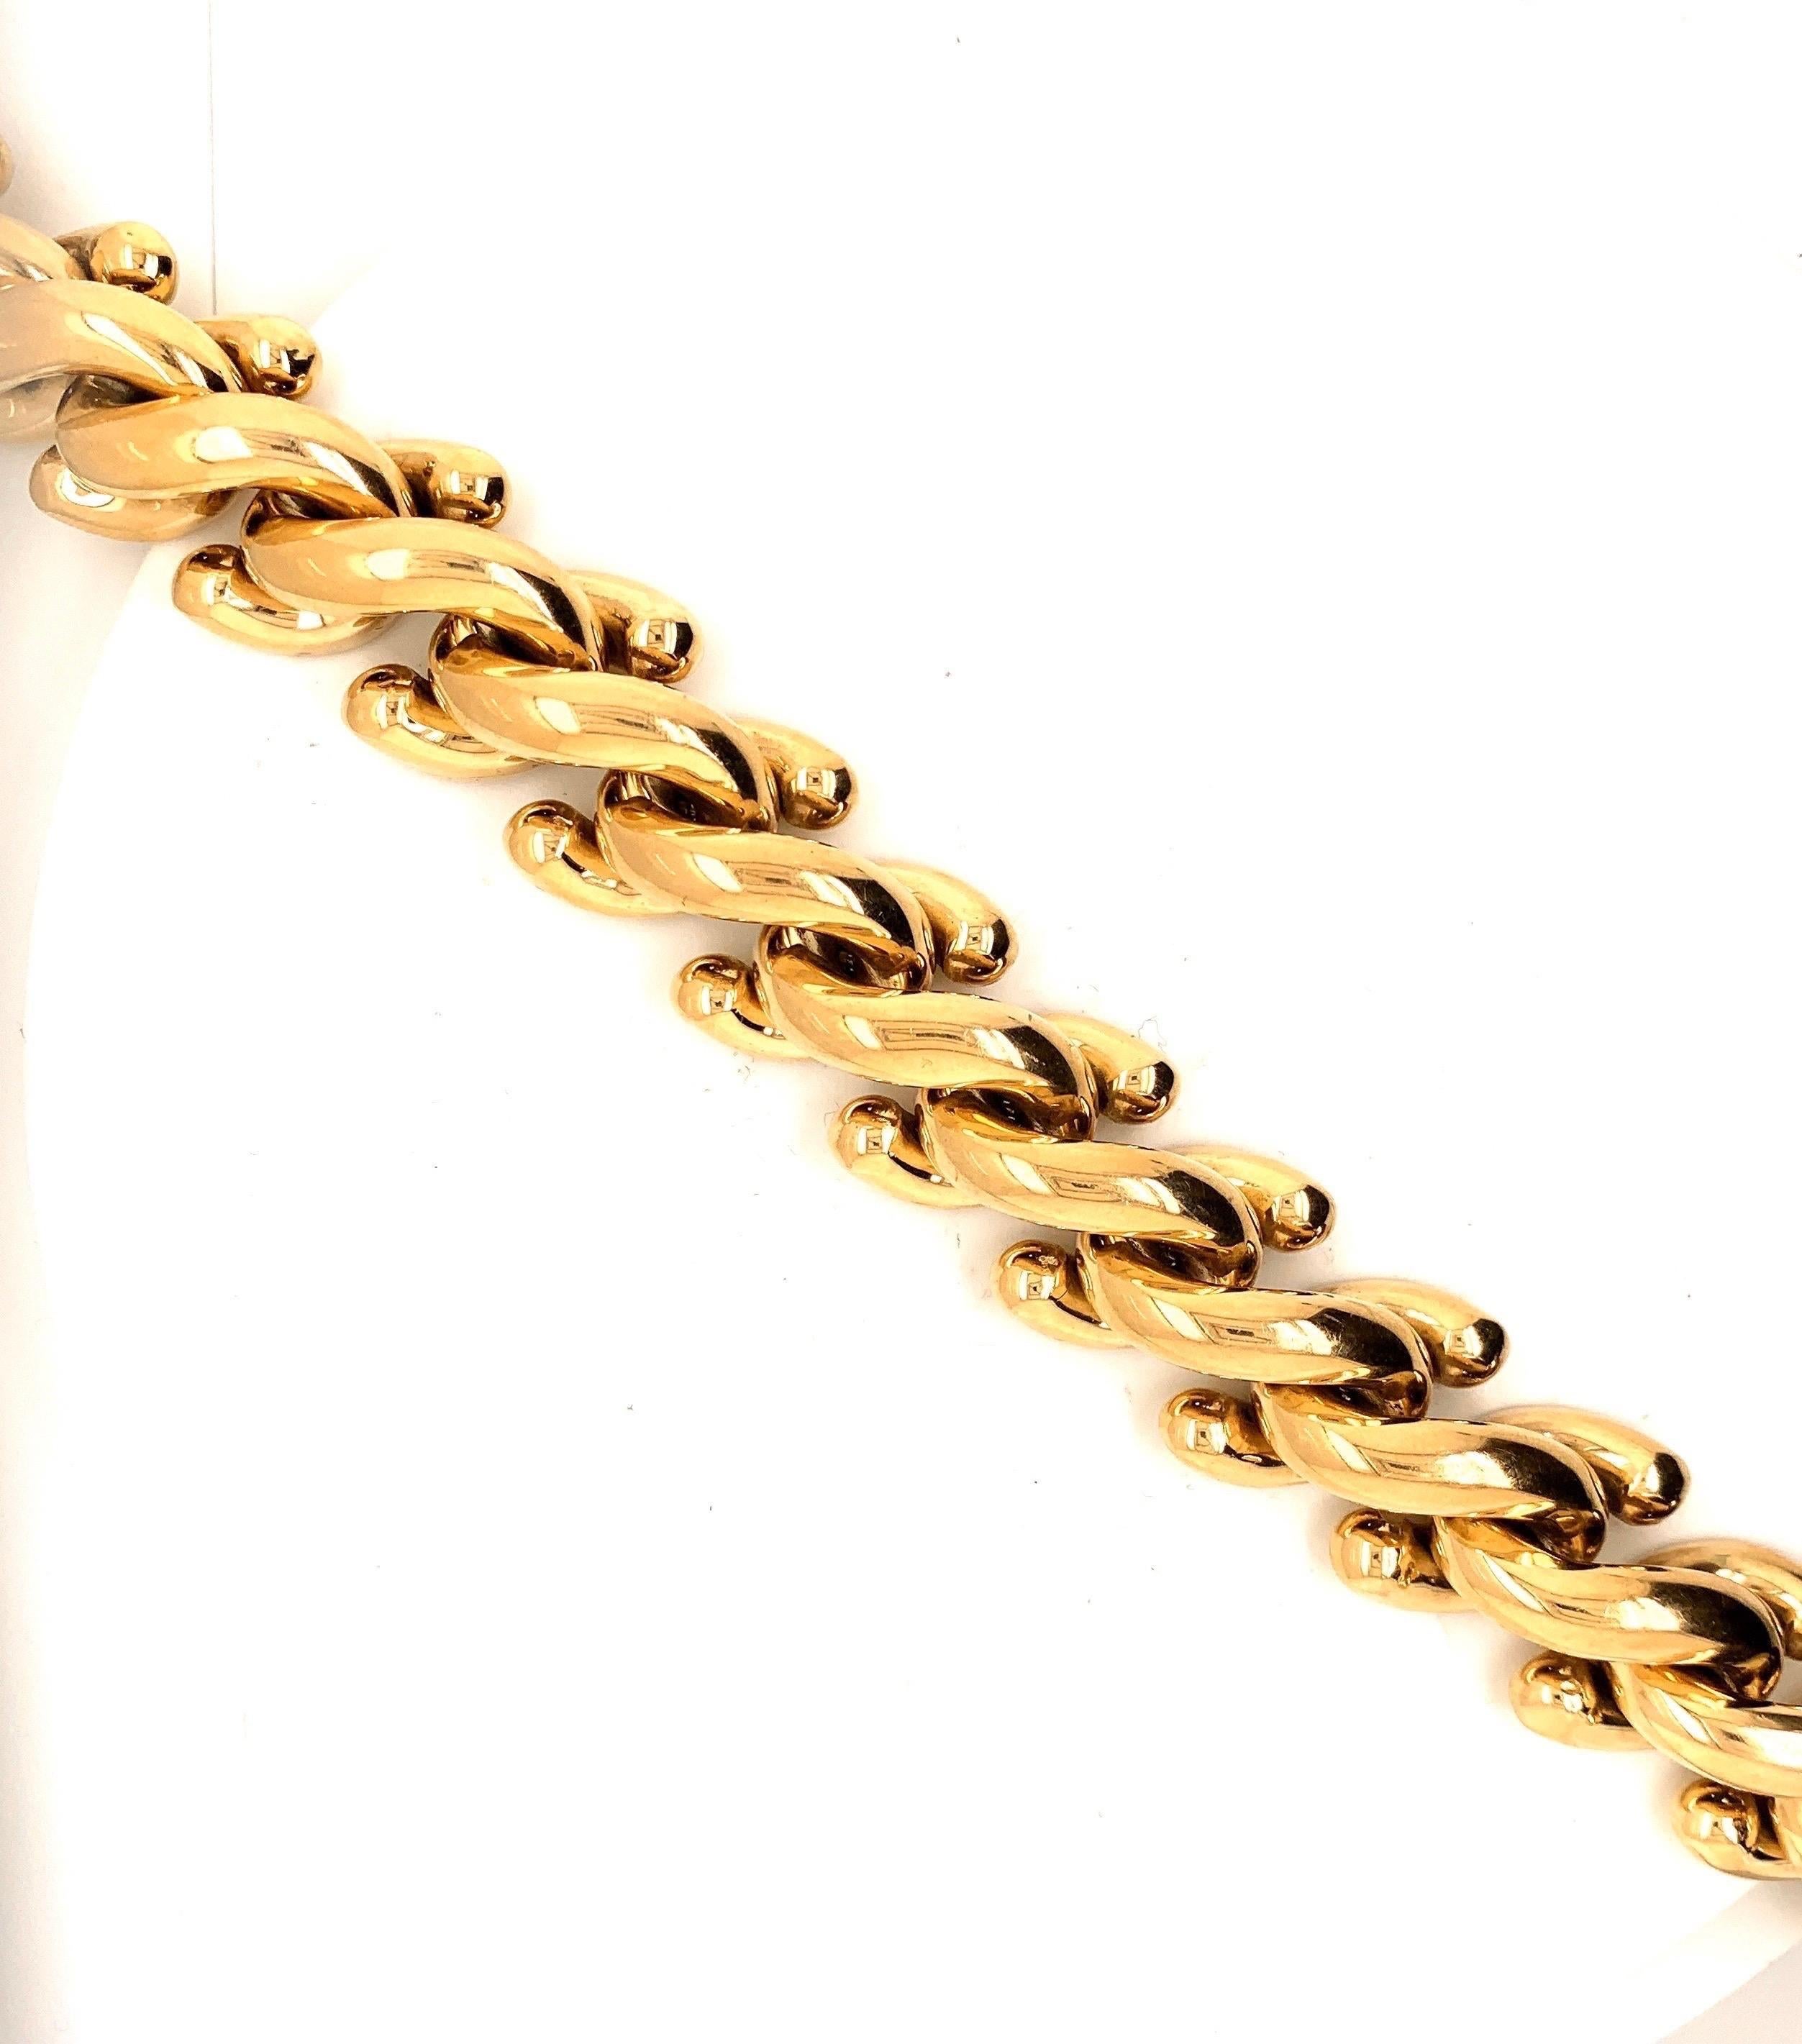 82 grams of 14k Gold, make up this incredible vintage Italian bracelet.

Viewings available in our NYC wholesale Office by appointment.